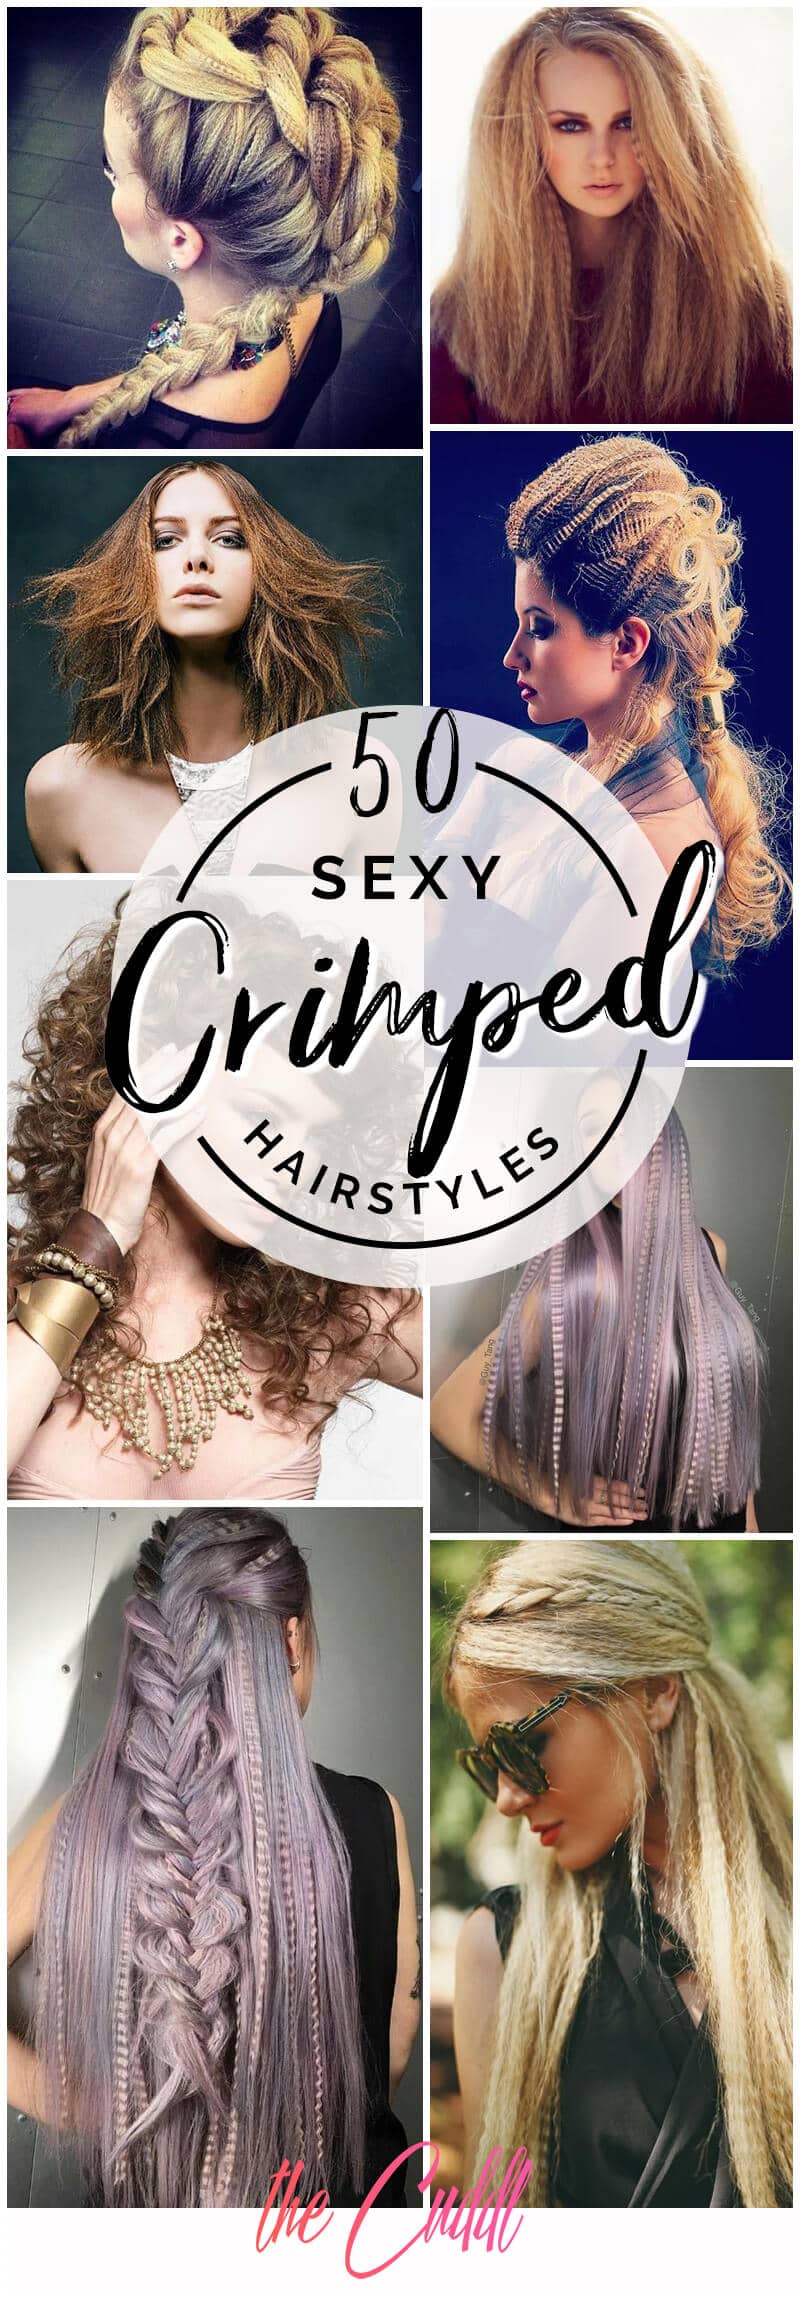 50 Sexy Crimped Hair Ideas That Will Make You Feel Daring